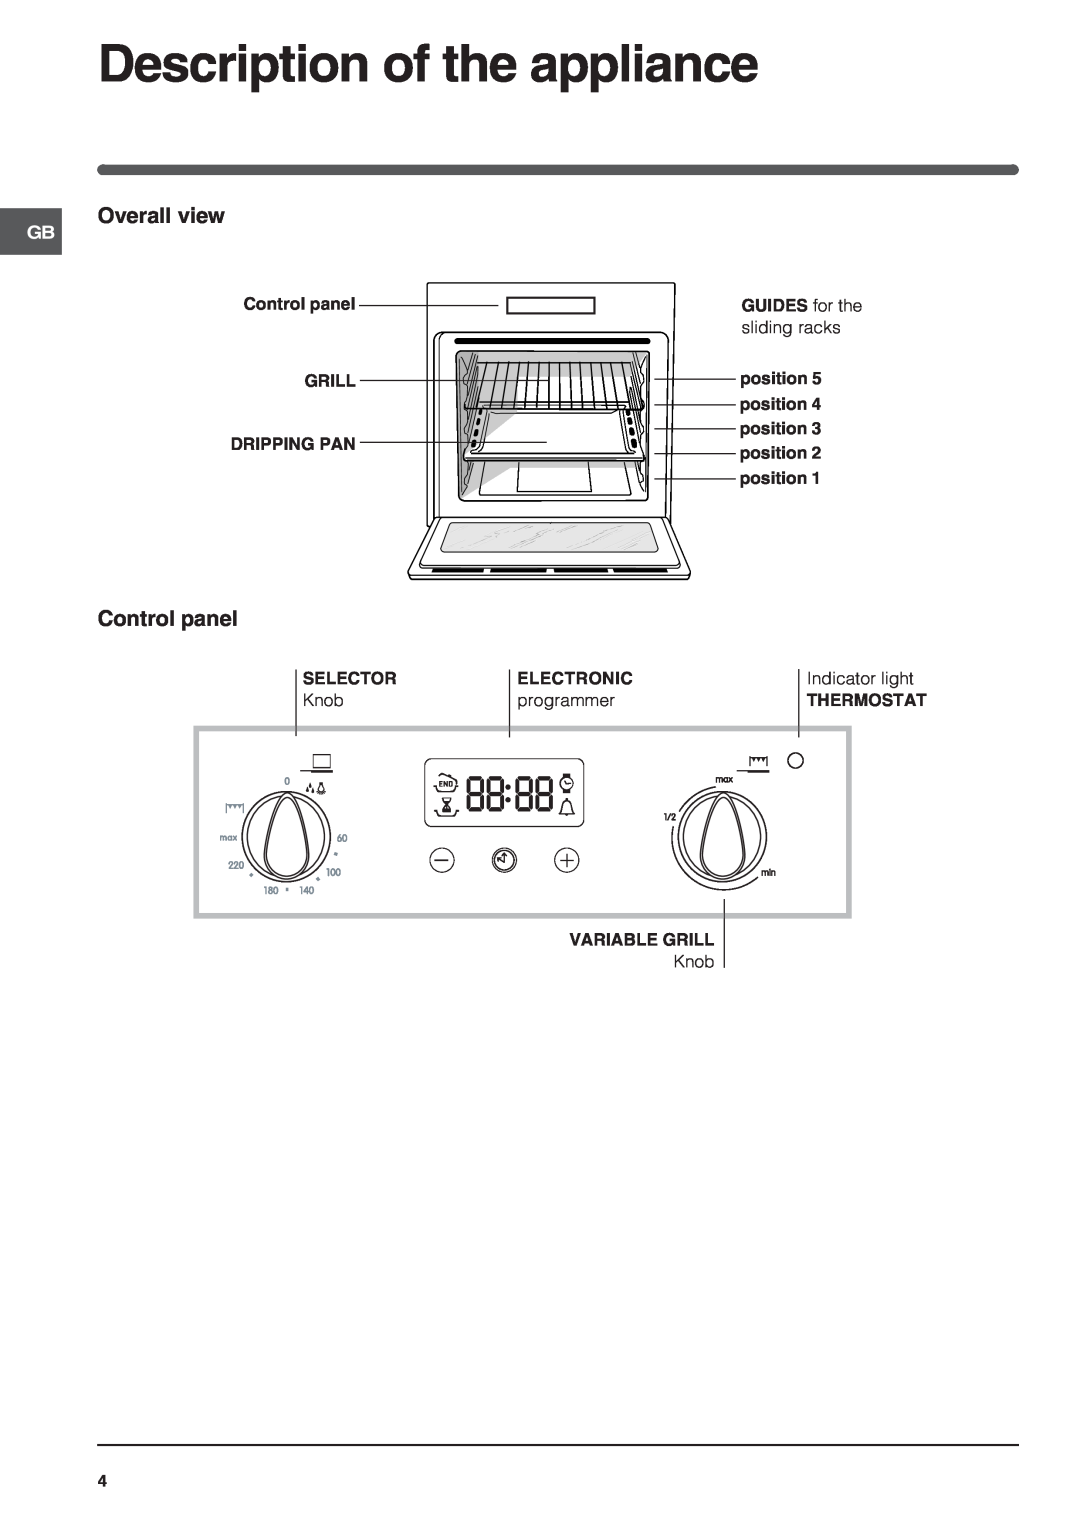 Indesit FIE 36 K.B GB/1, FIE 36 K.B IX GB/1 manual Description of the appliance, Overall view, Control panel 